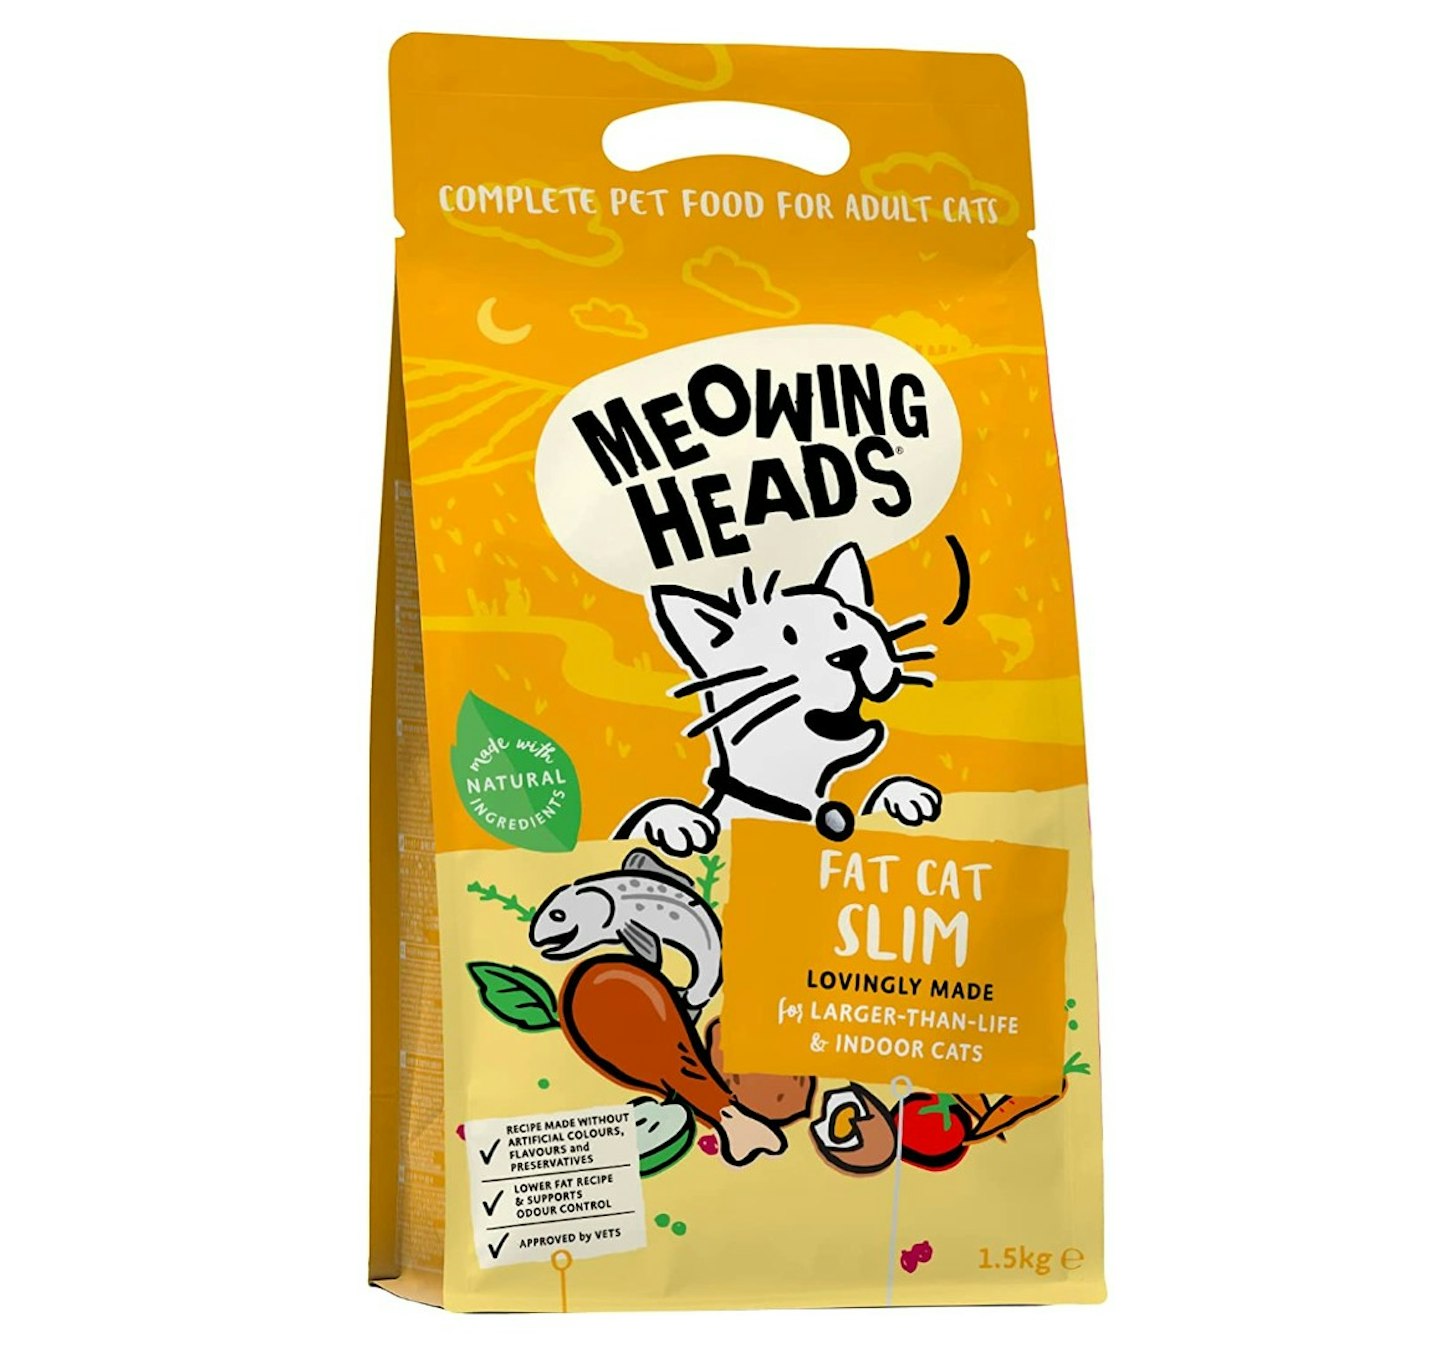 Meowing Heads Dry, Reduced-Calorie Cat Food 